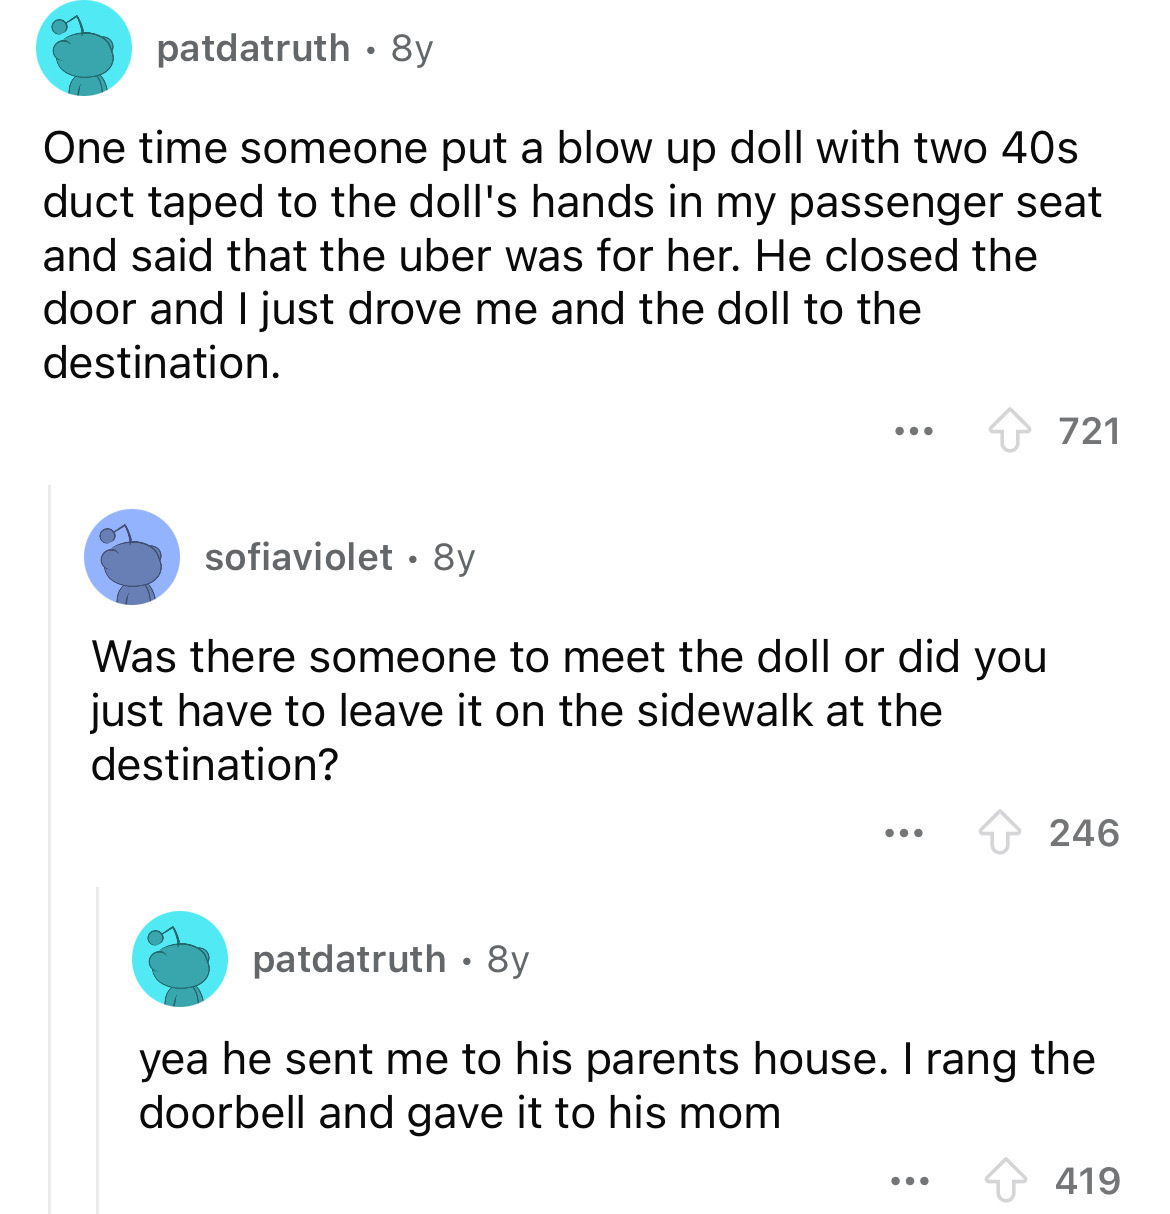 screenshot - patdatruth 8y One time someone put a blow up doll with two 40s duct taped to the doll's hands in my passenger seat and said that the uber was for her. He closed the door and I just drove me and the doll to the destination. sofiaviolet 8y ... 